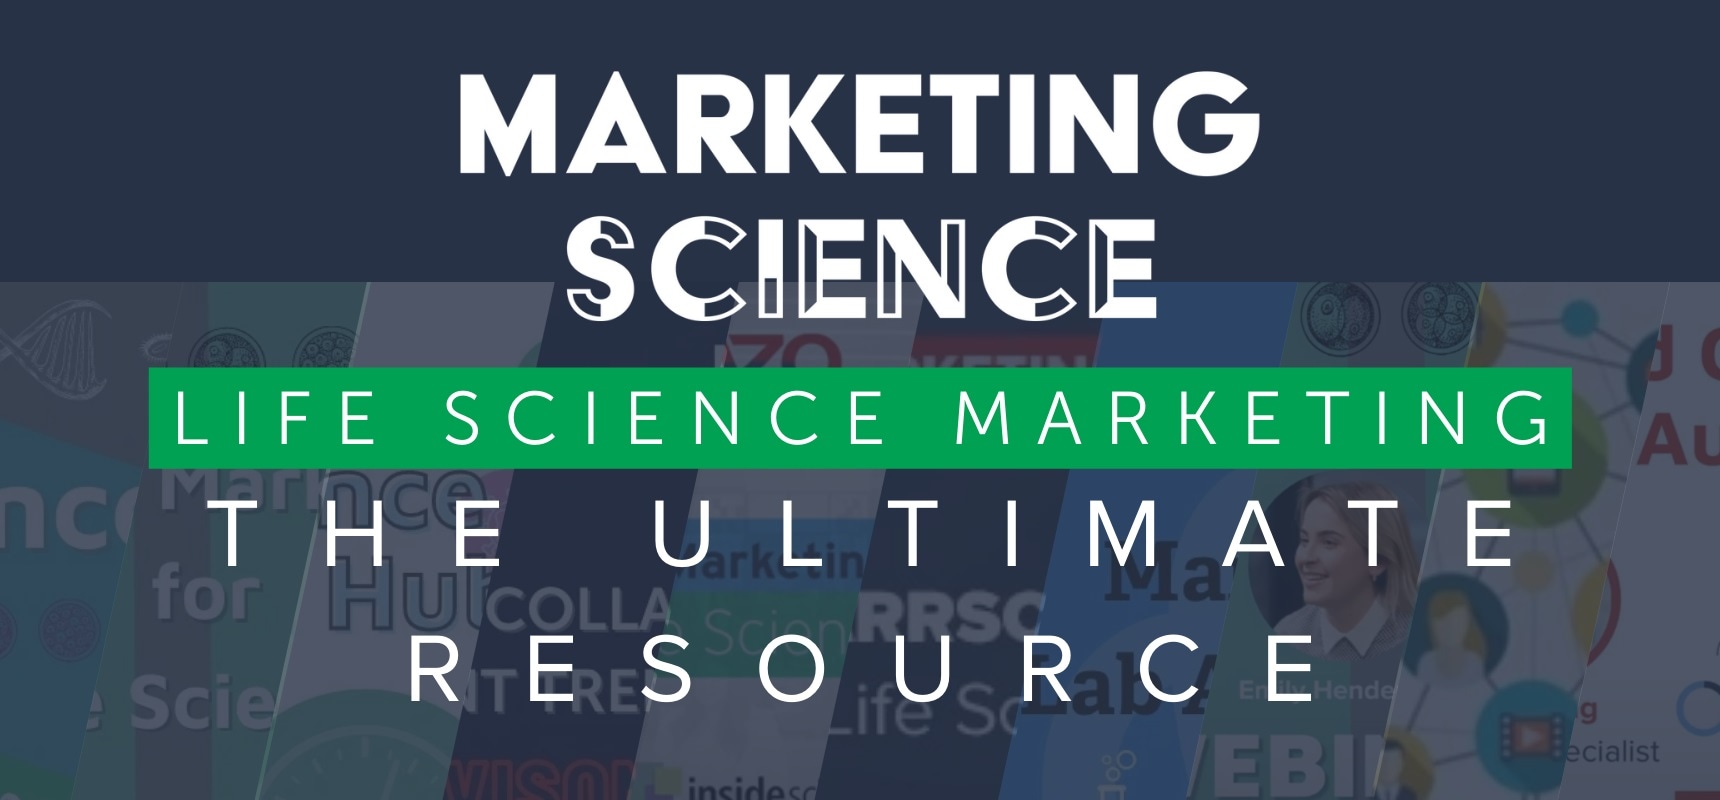 Life Science Marketing Guide Banner Image